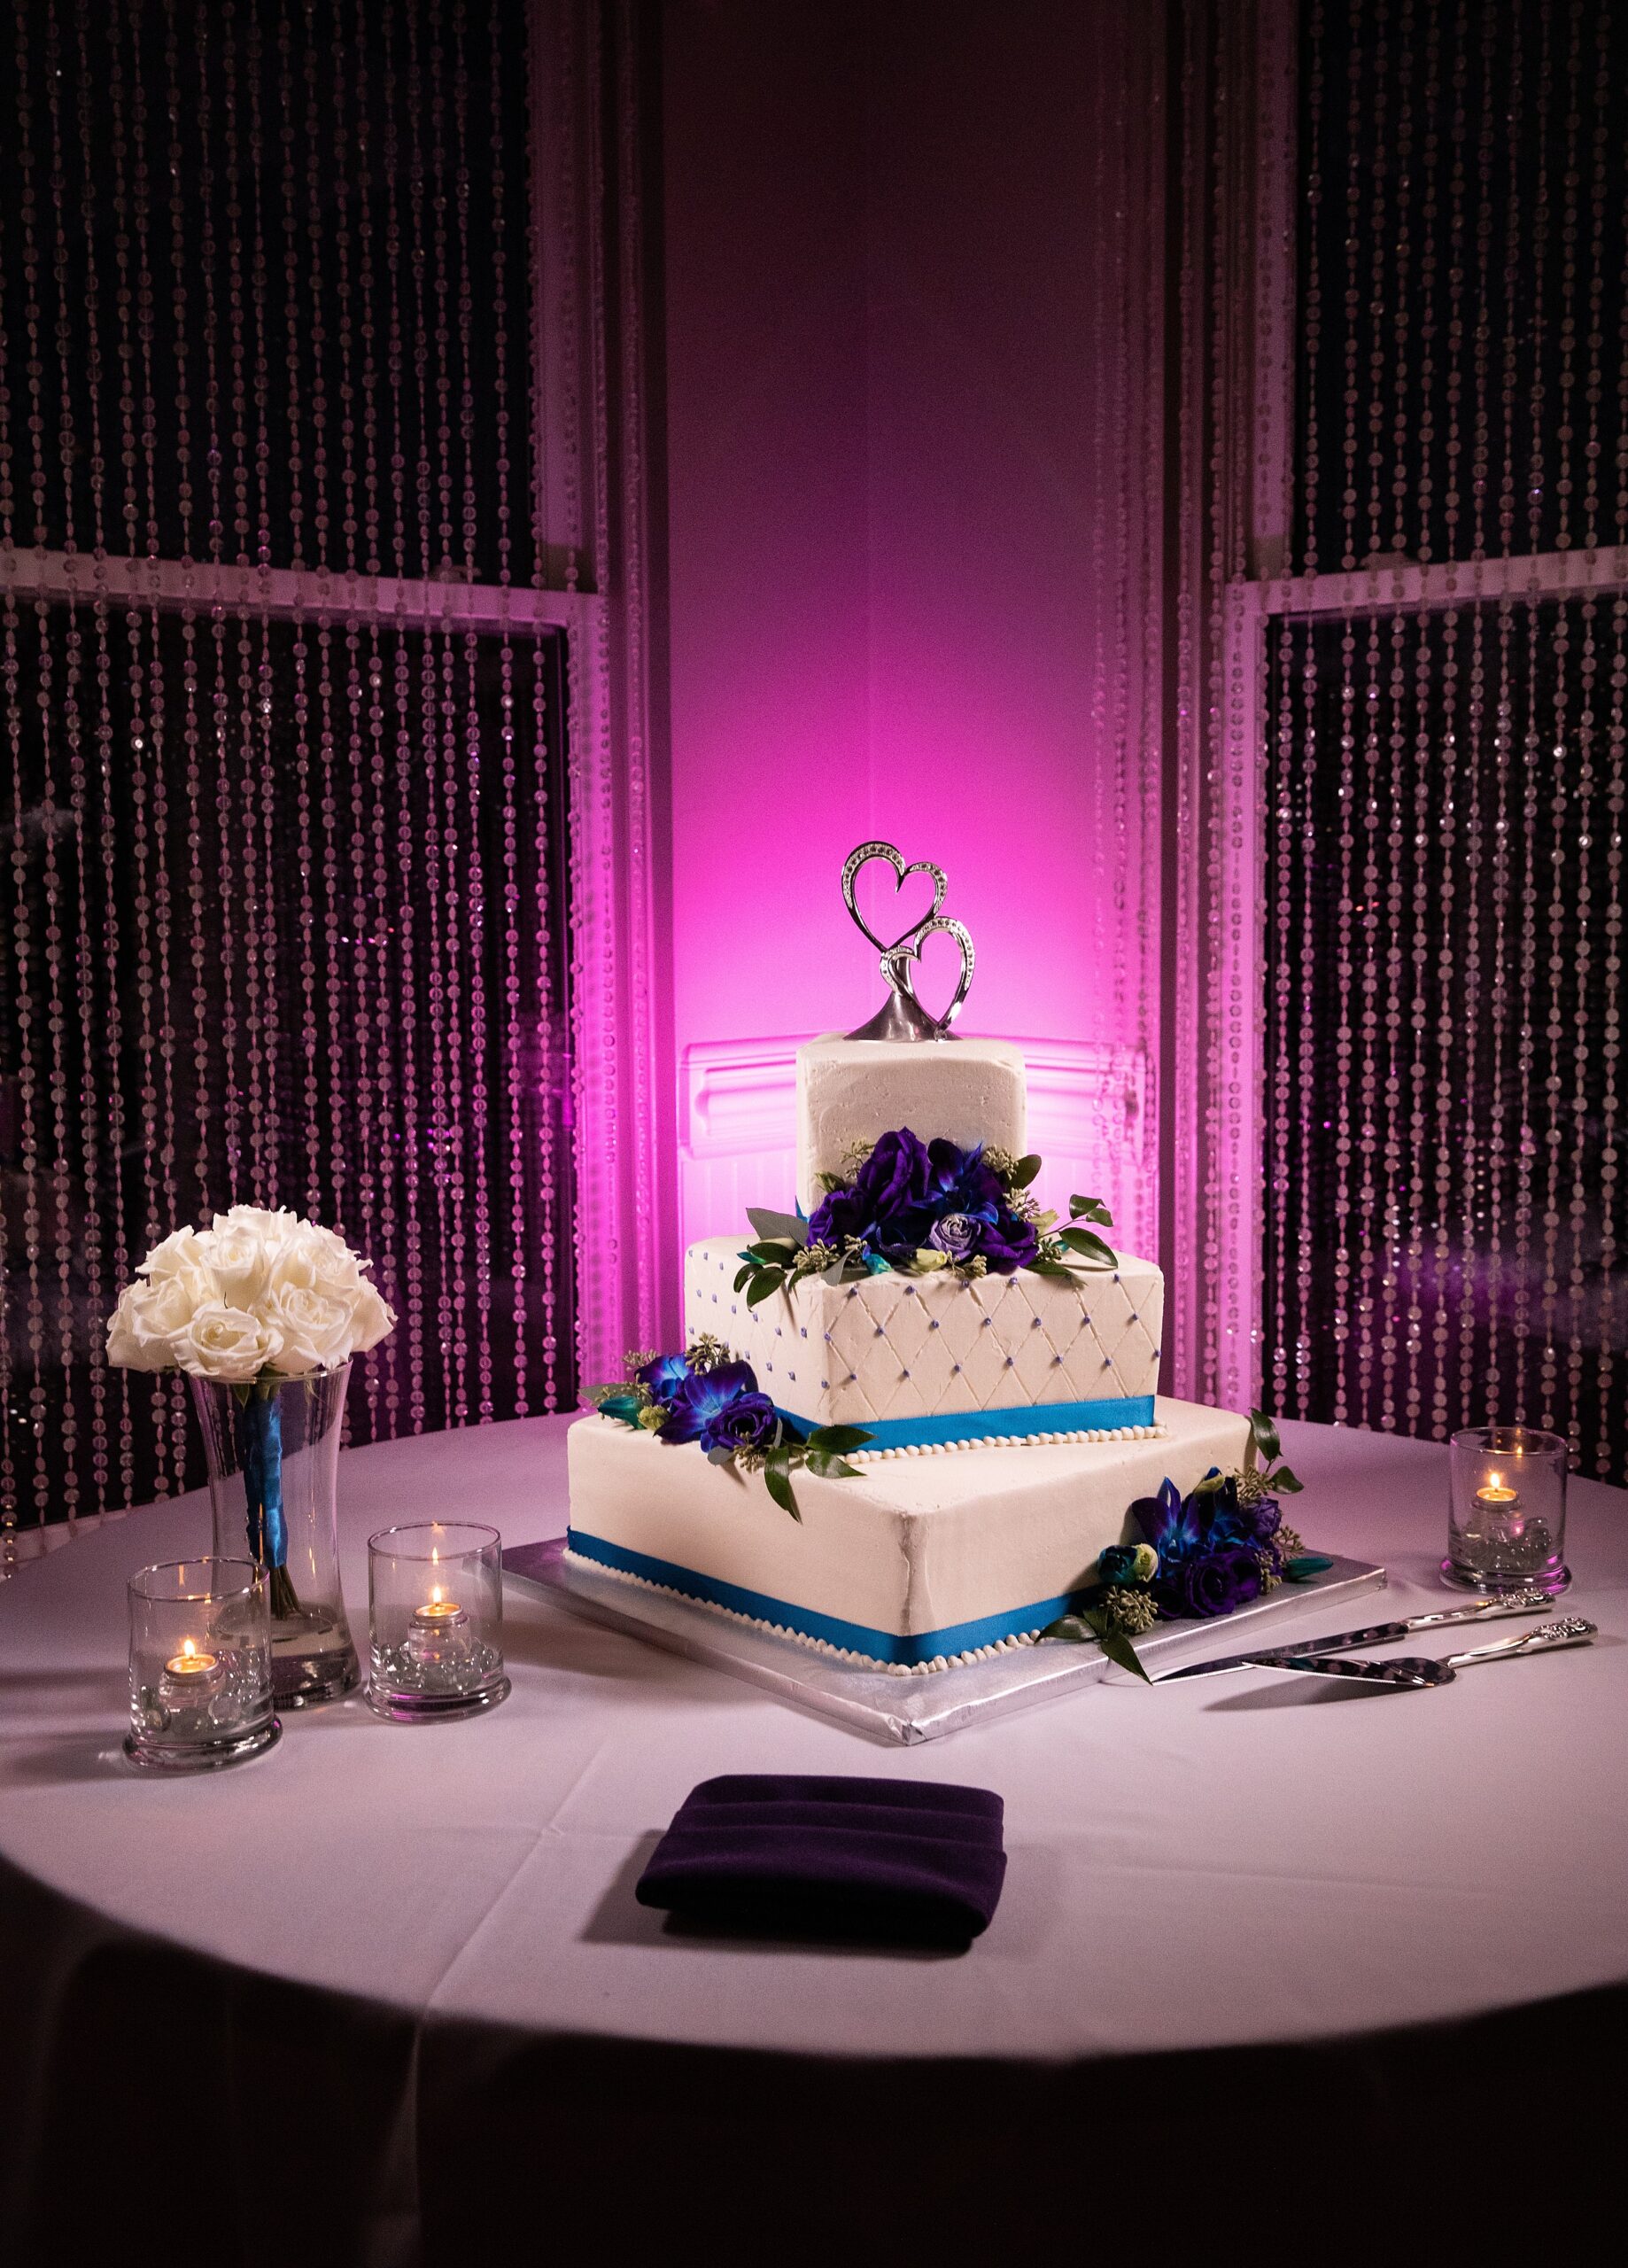 Details of a three tier wedding cake with blue banding